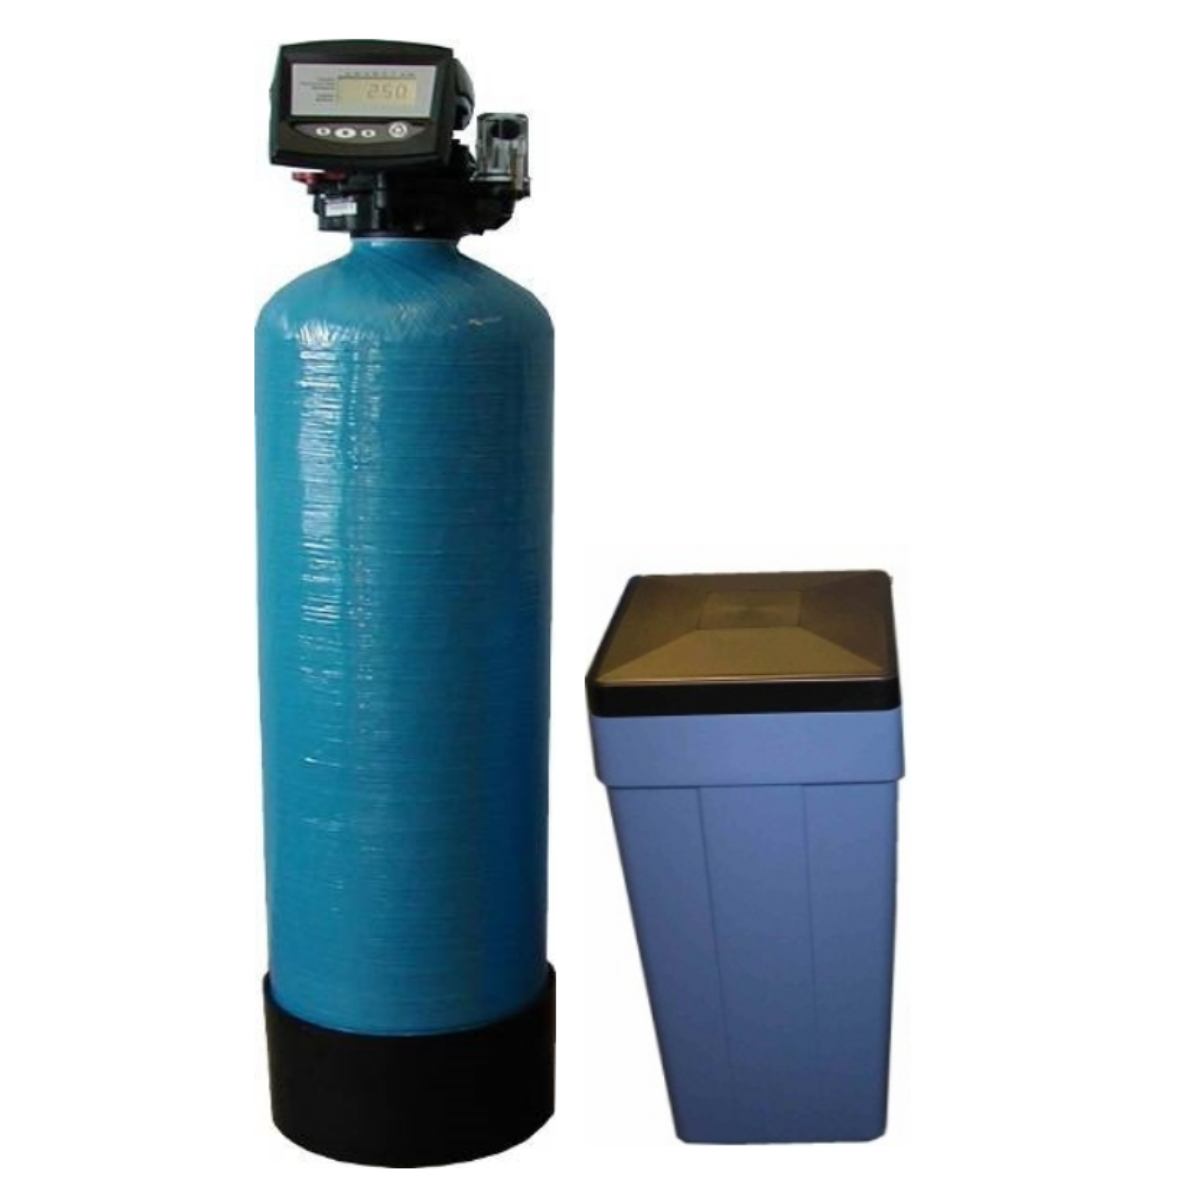 Simplex Autotrol 278 Time Based Controlled Commercial Water Softener 14" x 65", 125 Litres